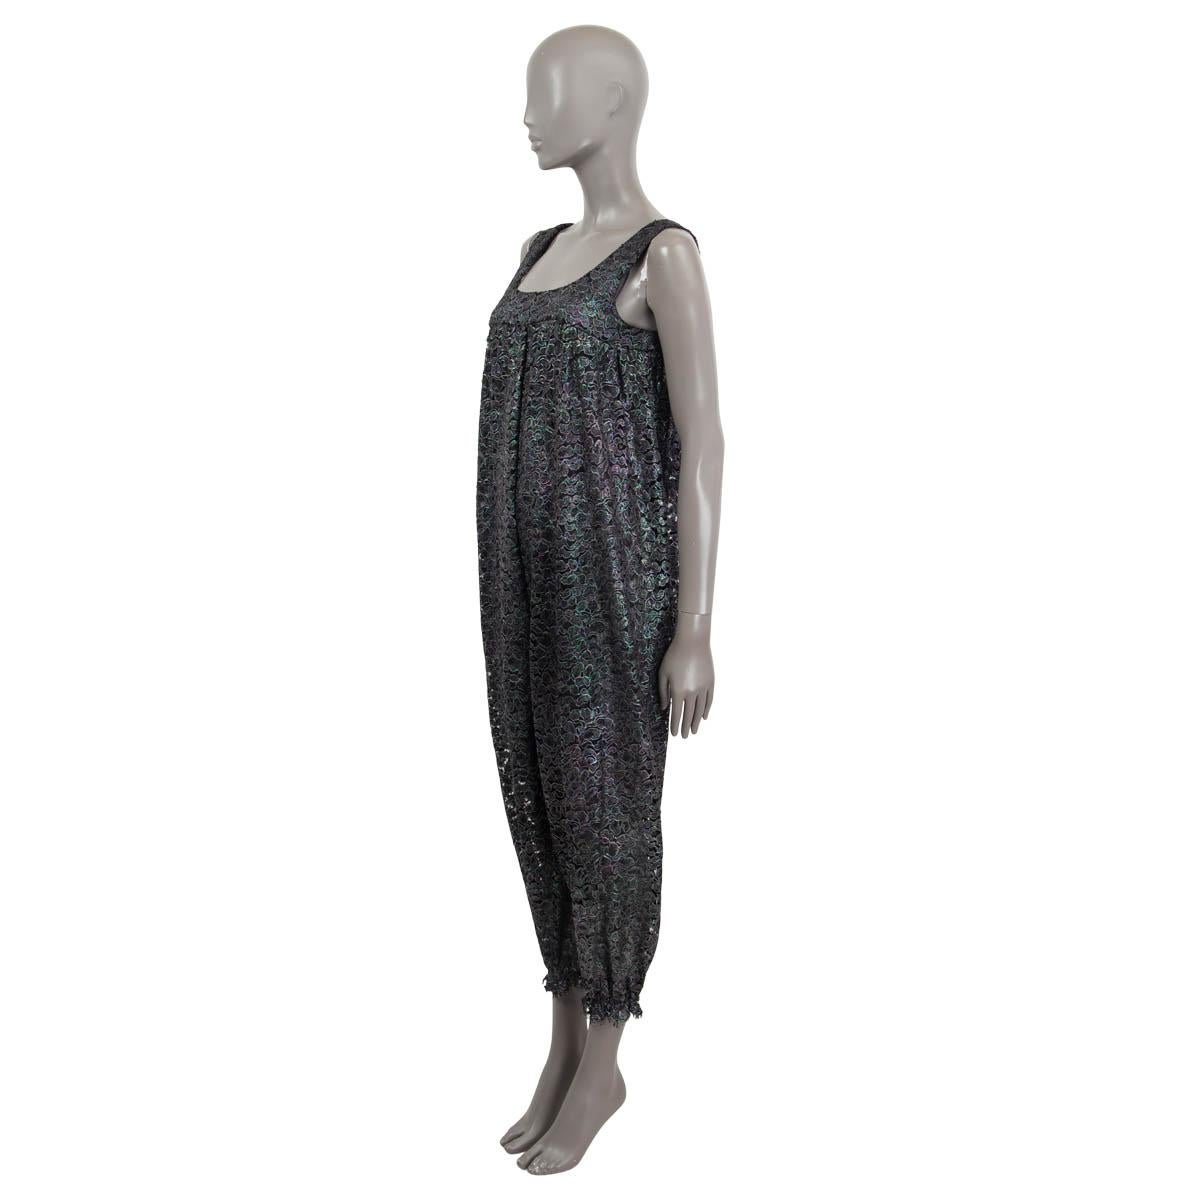 100% authentic Chanel iridescent drop crotch jumpsuit in petrol, purple, gray and black silk and elastane (assumed cause tag is missing). Opens with a zipper and a hook on the back. Comes with a slip jumpsuit in gray silk (assumed cause tag is